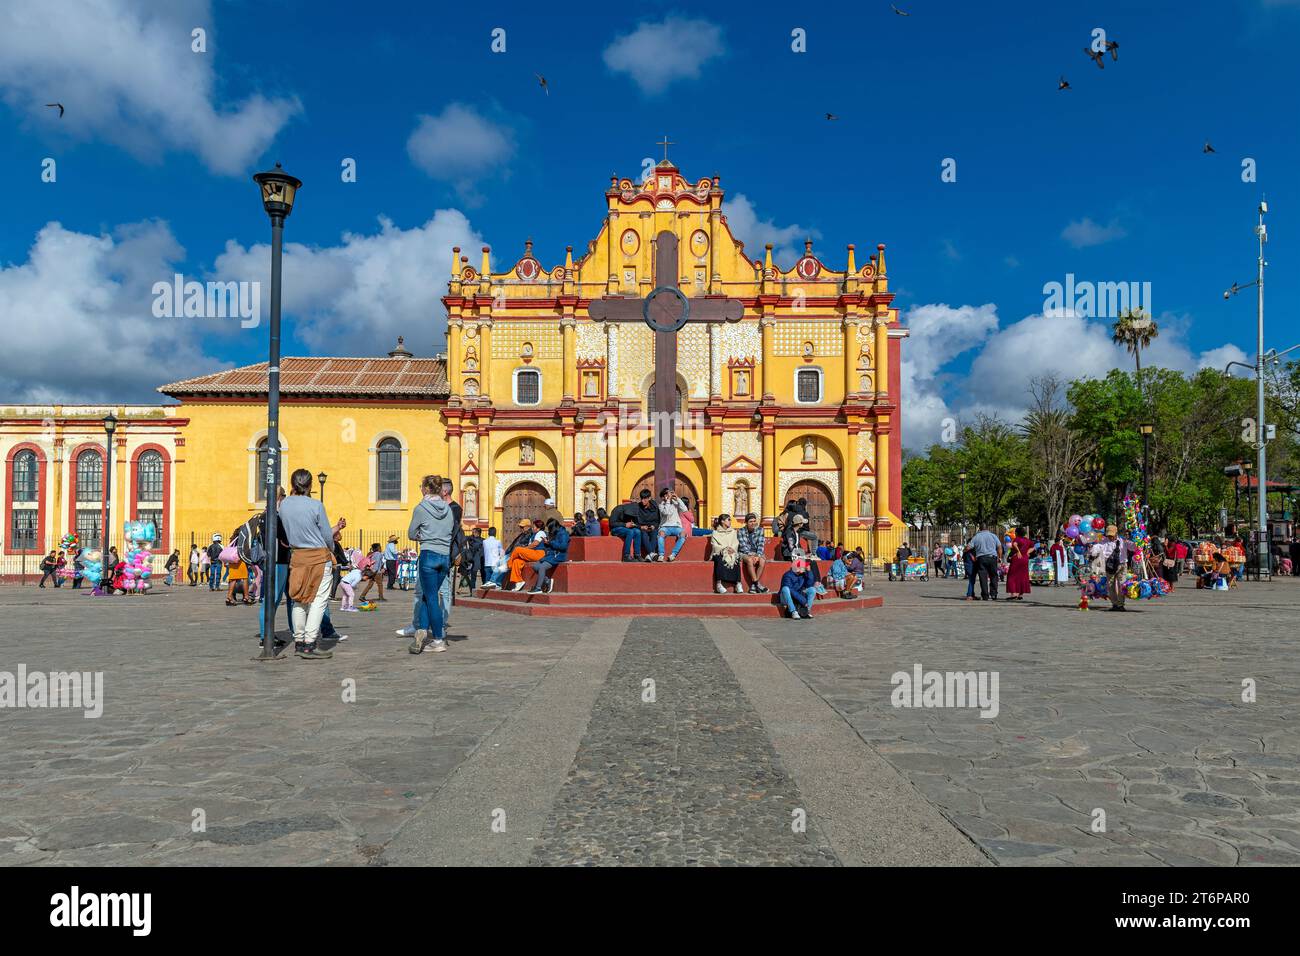 Cathedral of San Cristobal de las Casas and its main square with people, Chiapas, Mexico. Stock Photo